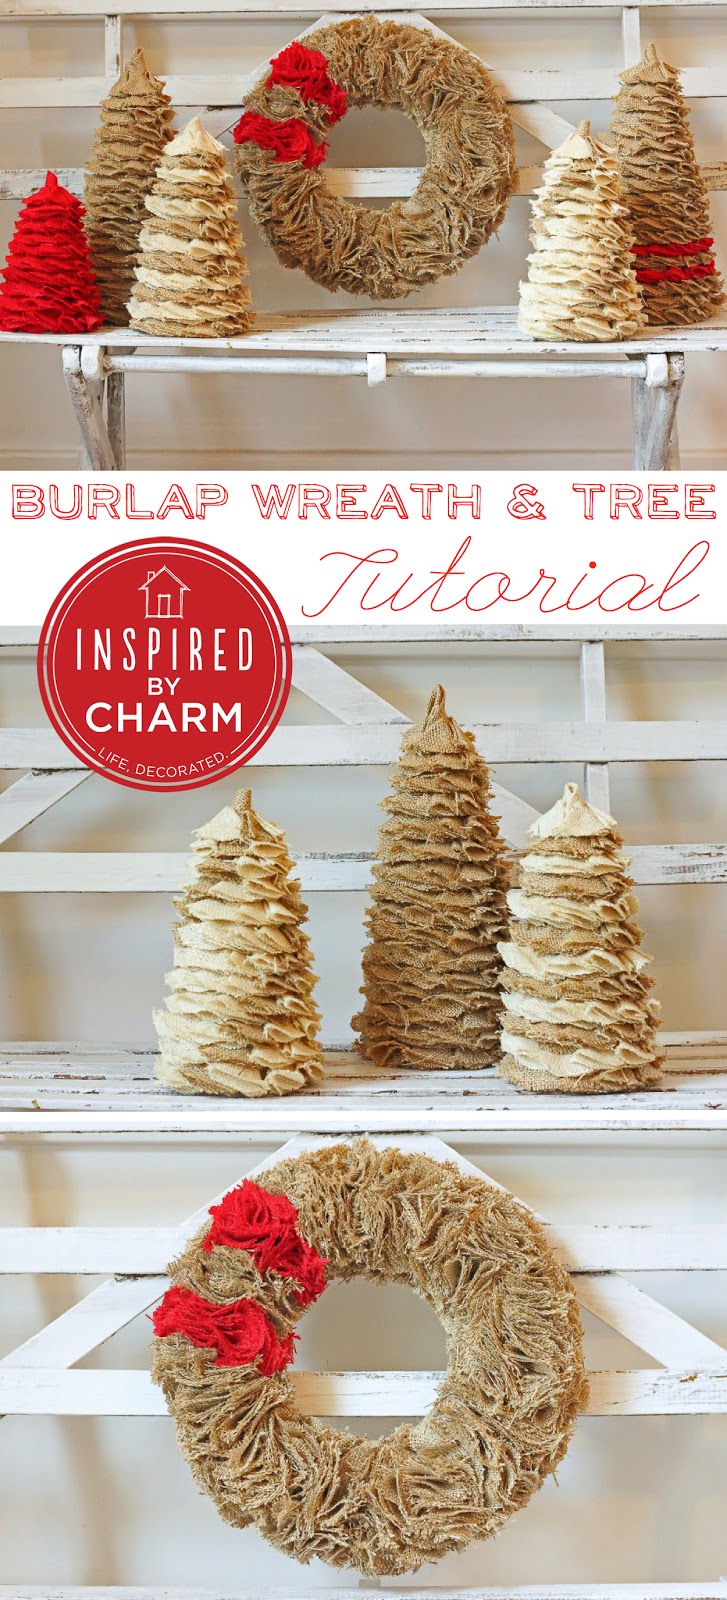 12 Days of Christmas, Day 2 // Burlap Tree and Wreath Tutorial